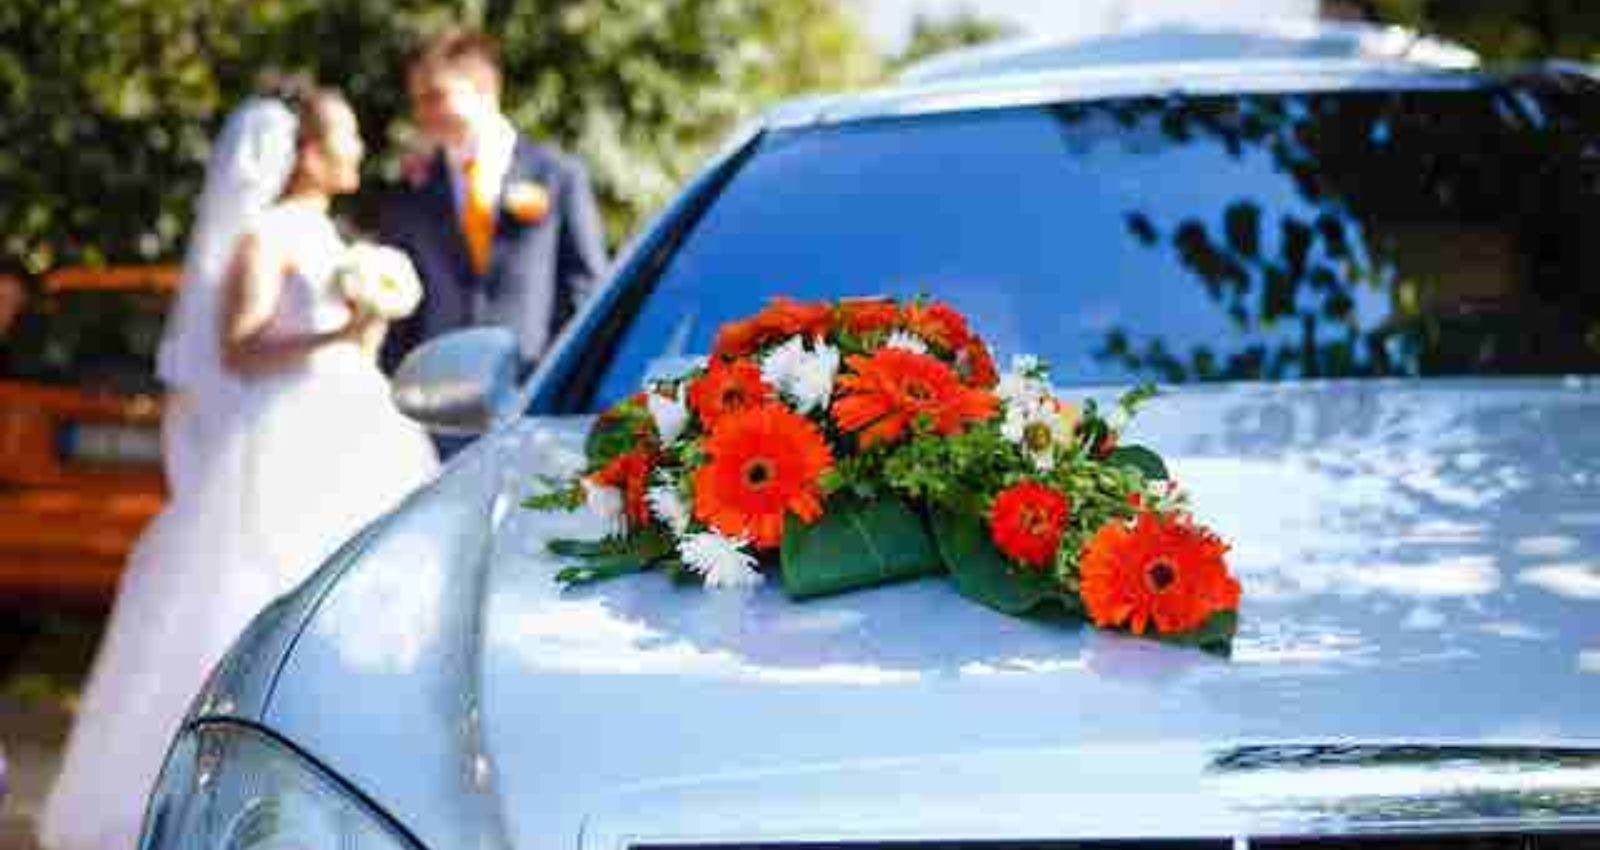 Groom and bride standing near car